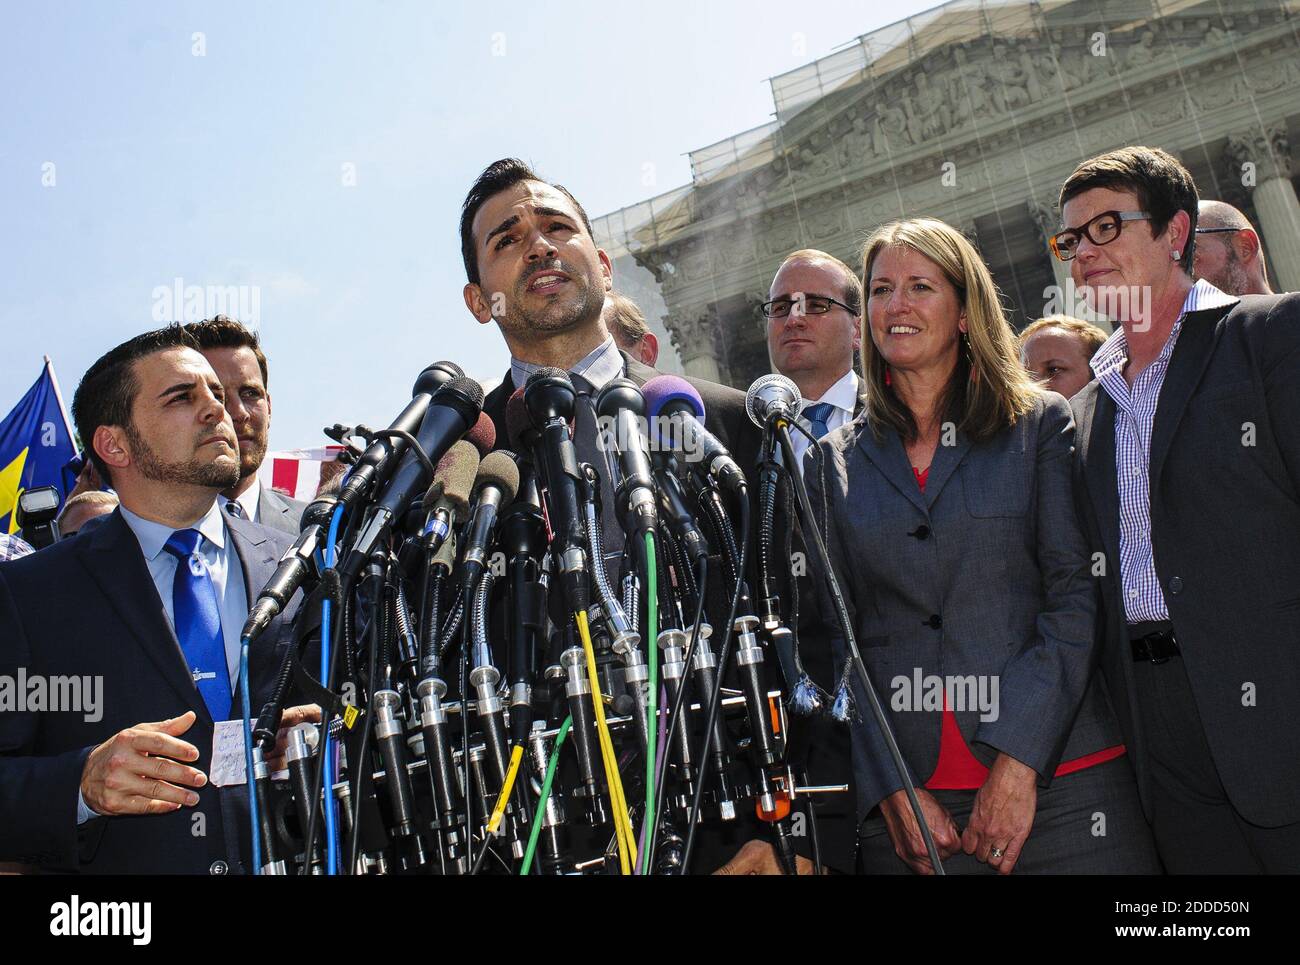 NO FILM, NO VIDEO, NO TV, NO DOCUMENTARY - Plaintiffs in the challenge to California's Proposition 8, Paul Katami, center, and Jeff Zarillo, left, speak outside the U.S. Supreme Court on Wednesday, June 26, 2013. While the court struck down the Defense of Marriage Act, it chose not to rule on an appeal on Proposition 8 effectively undercutting the law. Photo by Pete Marovich/MCT/ABACAPRESS.COM Stock Photo